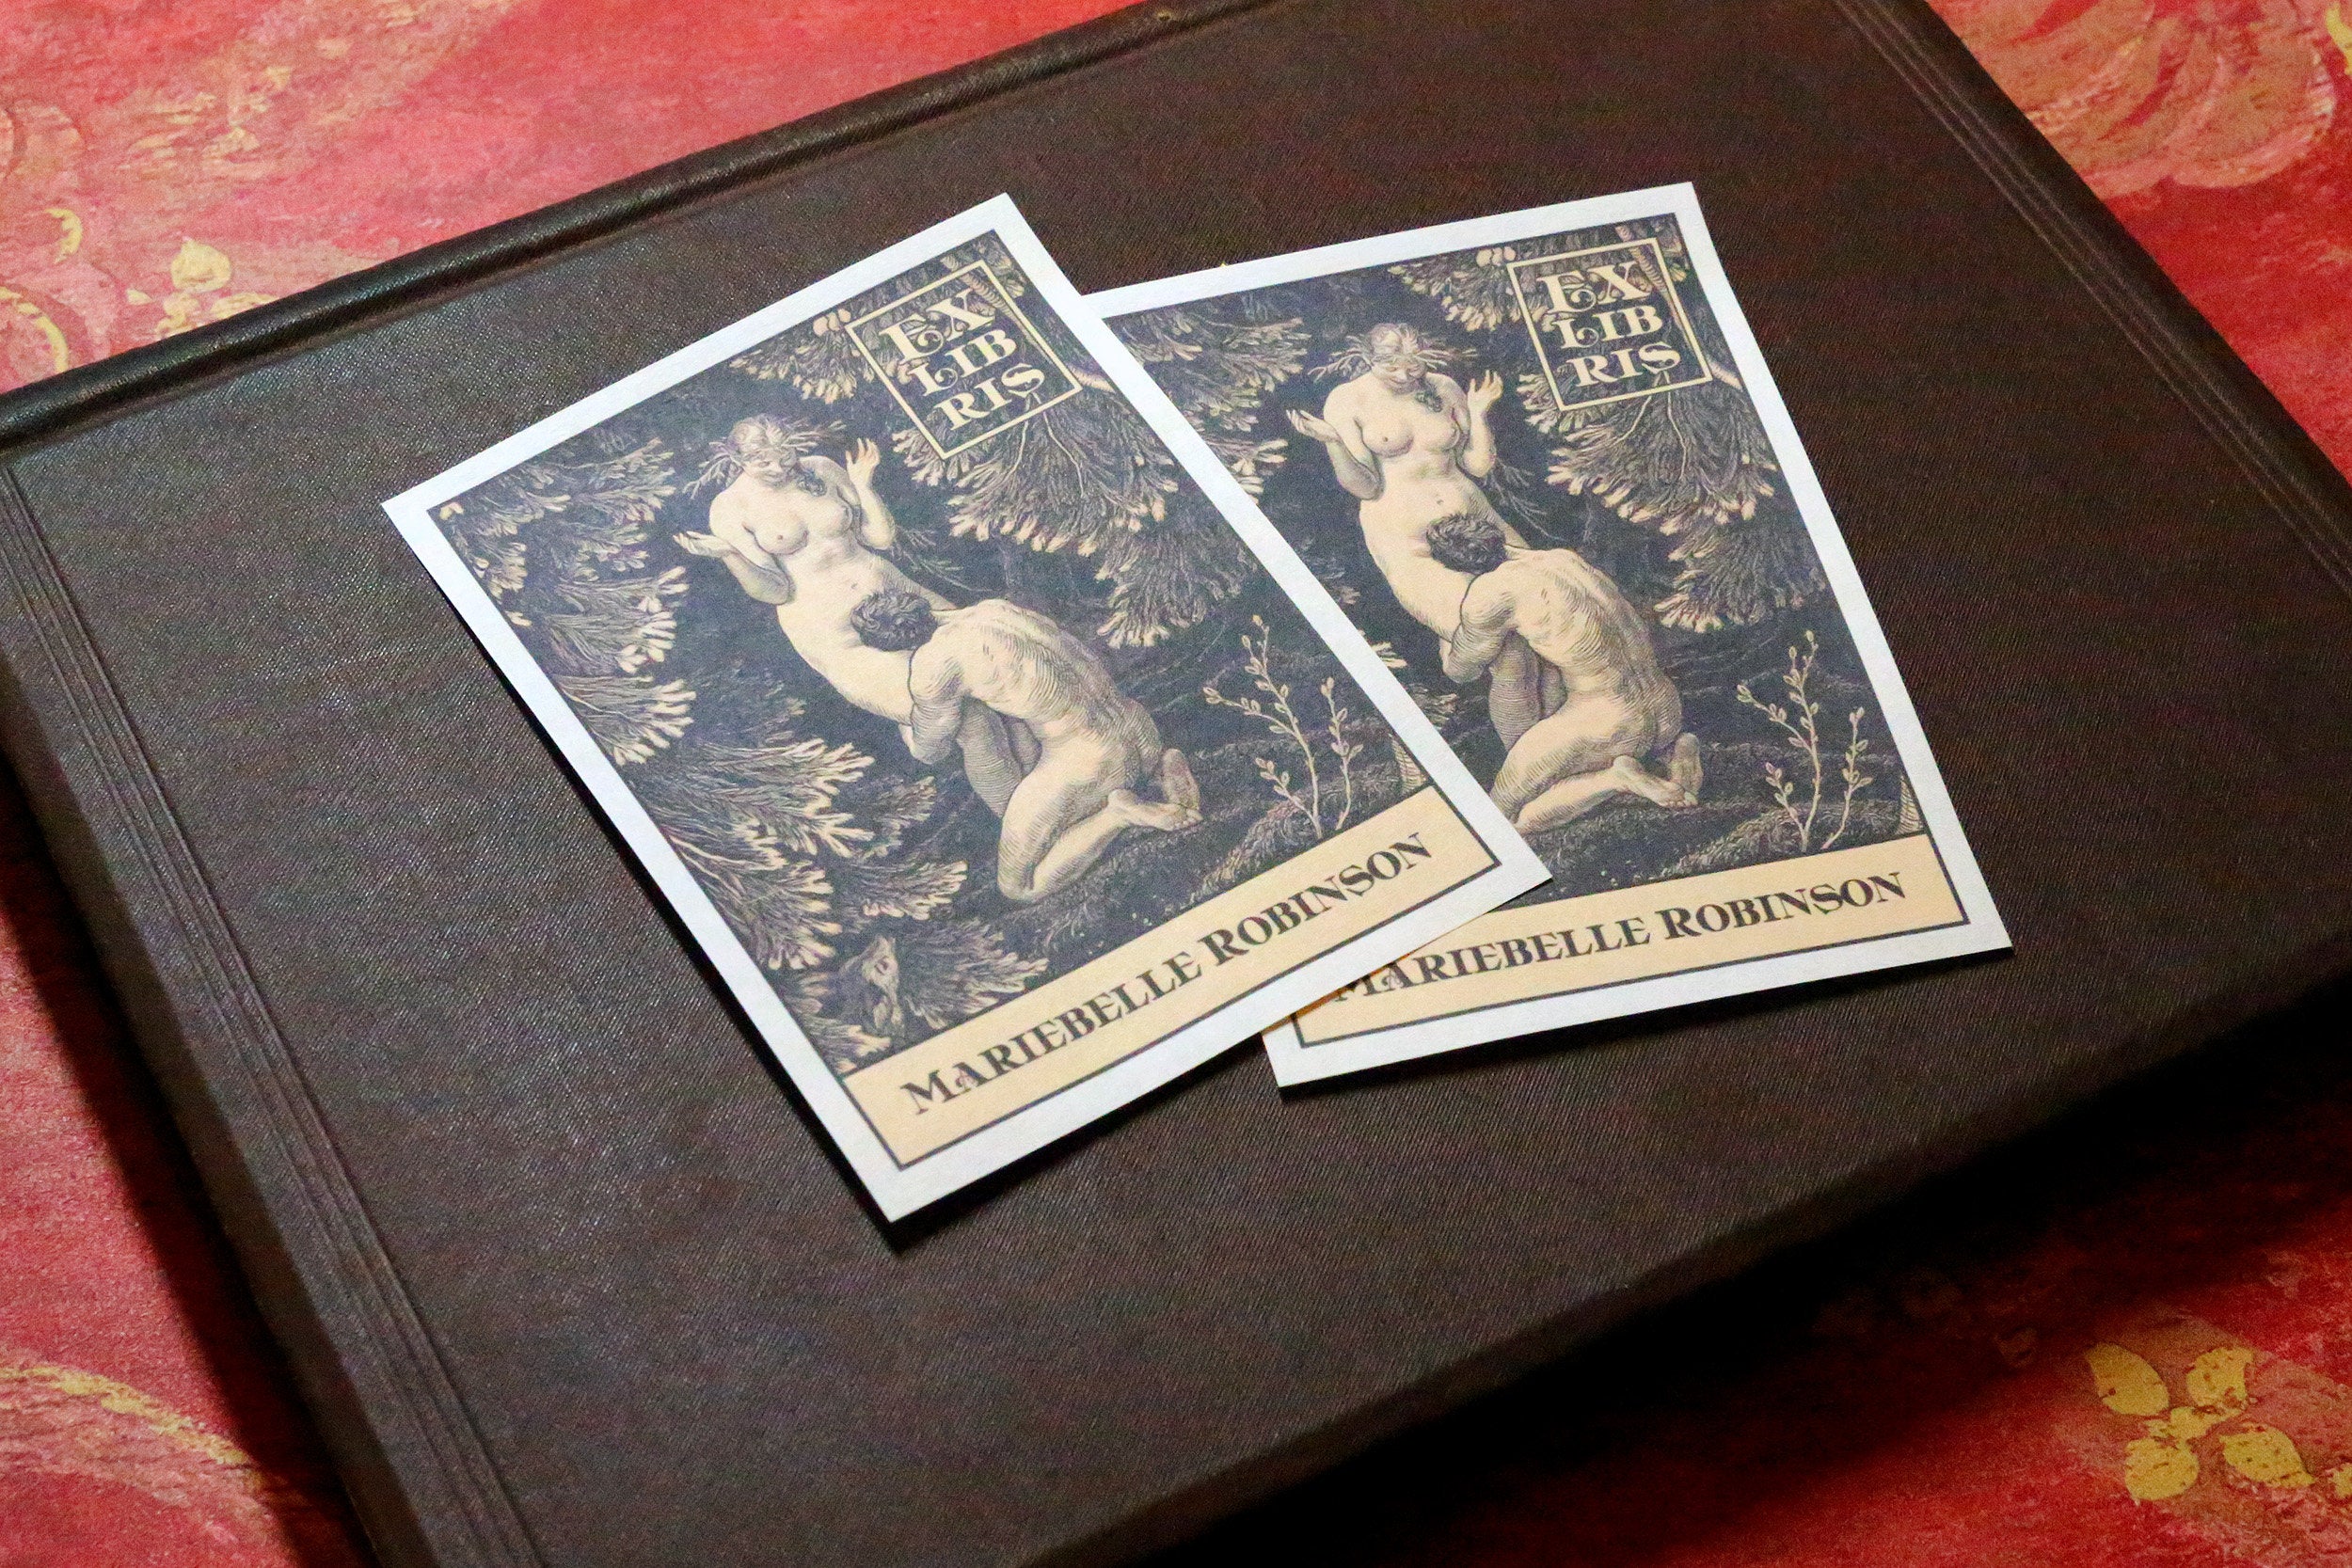 In Paradise, Personalized Erotic Ex-Libris Bookplates, Crafted on Traditional Gummed Paper, 3in x 4in, Set of 30